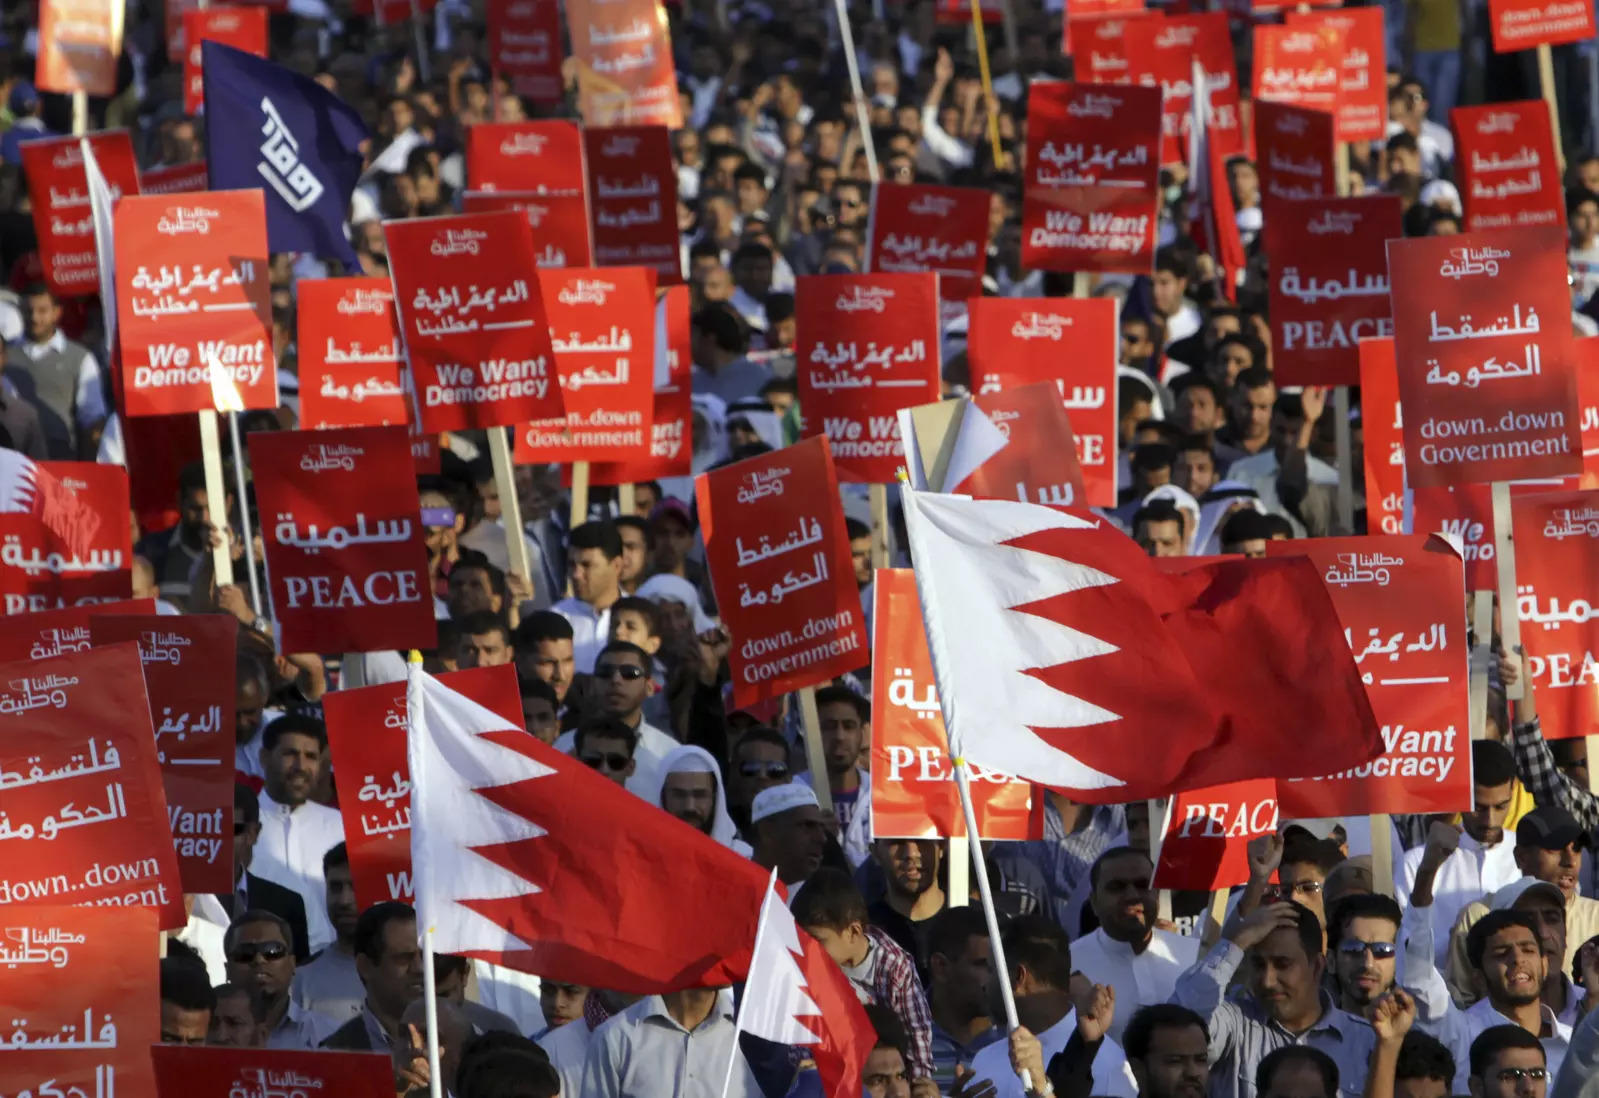  Hackers said they had taken down the website of Bahrain's international airport on Tuesday, Feb. 14, 2023, to mark the 12-year anniversary of an Arab Spring uprising in the small Gulf country. (AP Photo/Hasan Jamali, File)